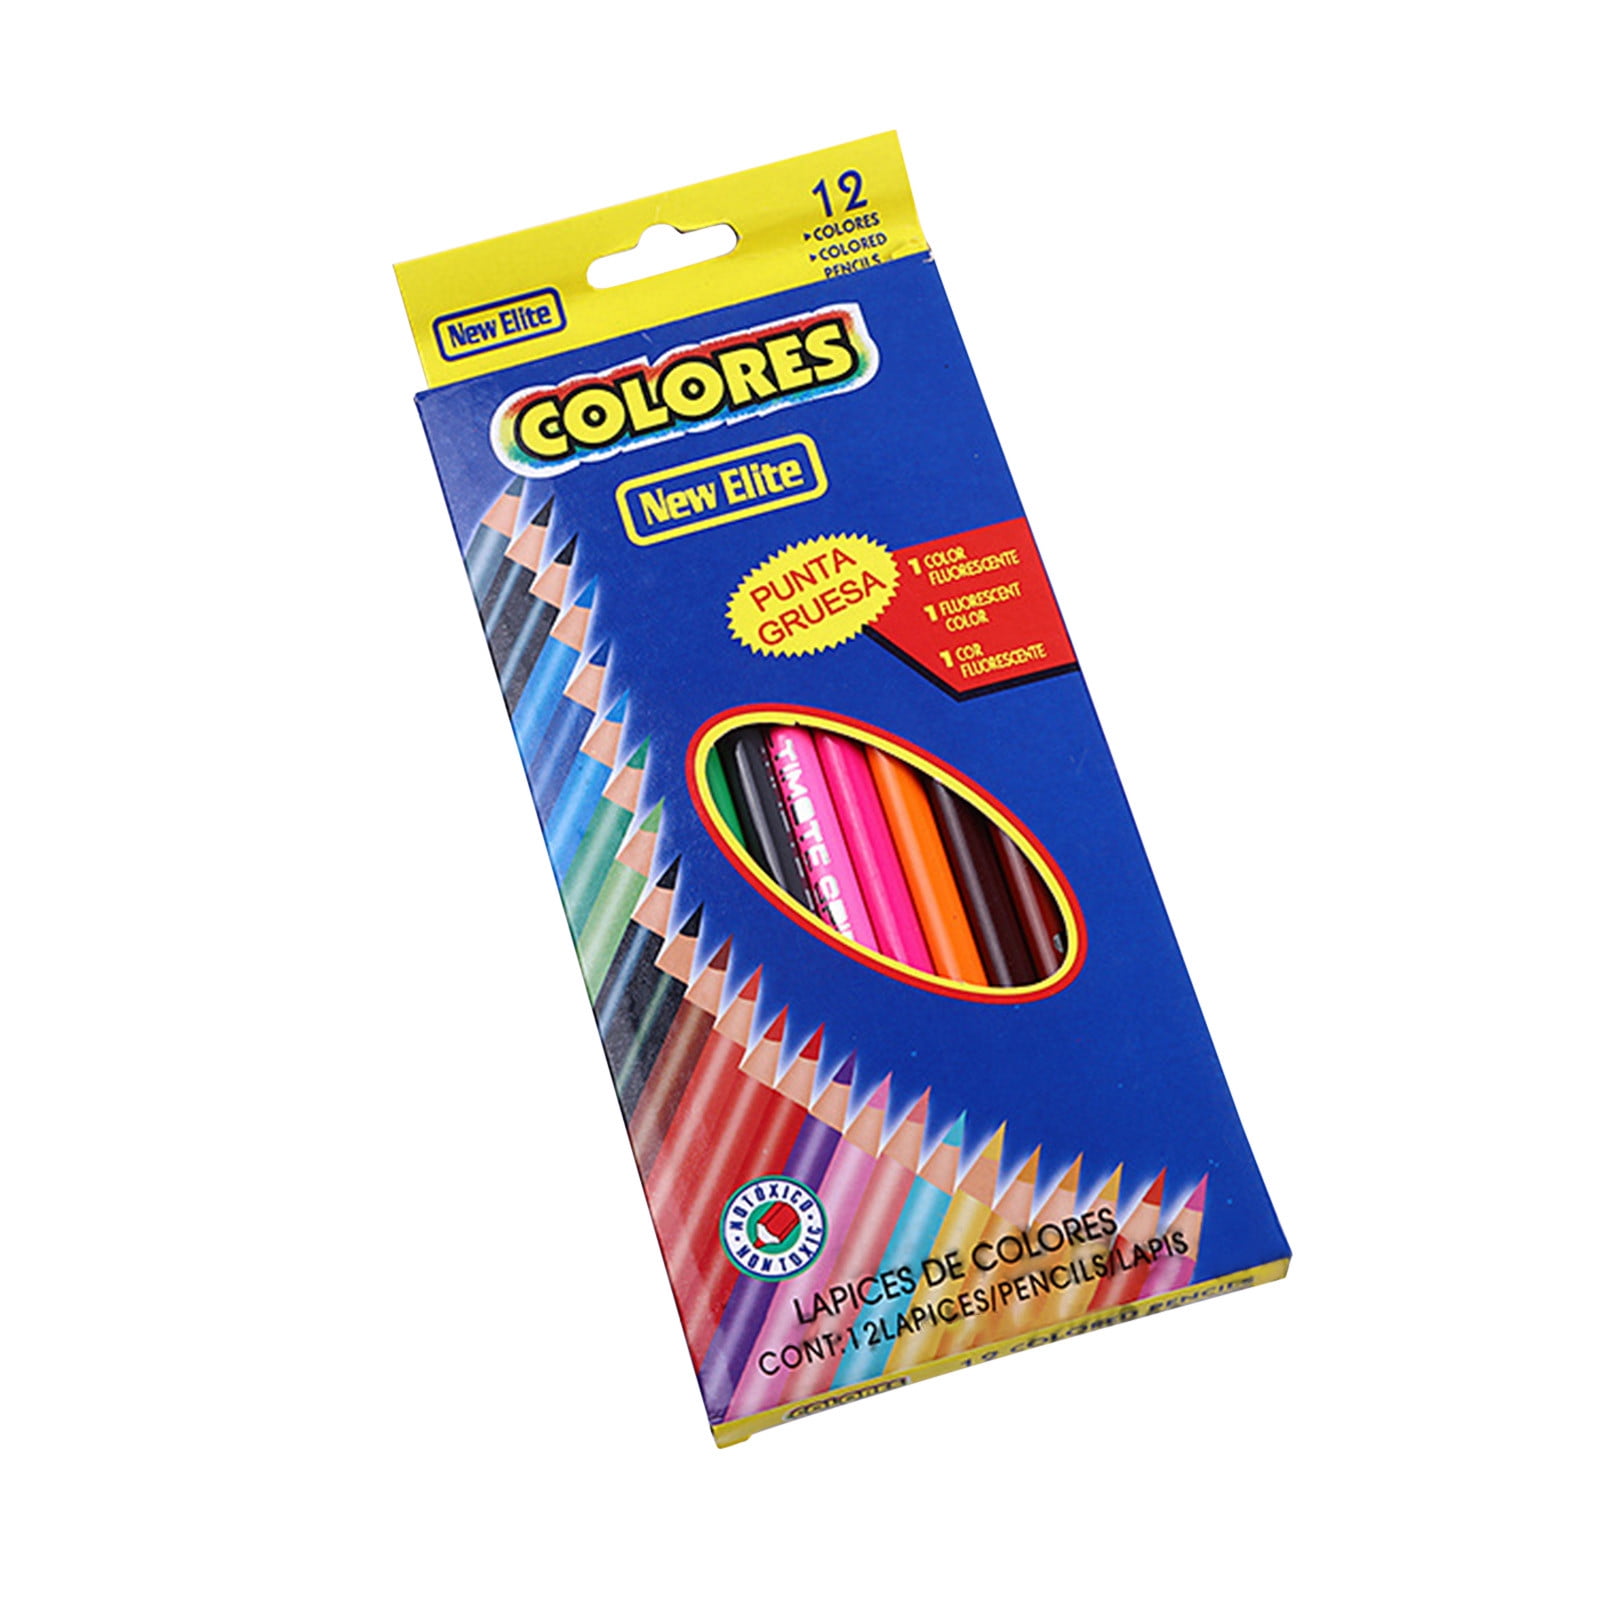 Covacure Colored Pencils Set for Adult and Kids - Covacure Premier Color Pencil Set with 36 Colouring Pencils Sharpener and Canvas Pencil